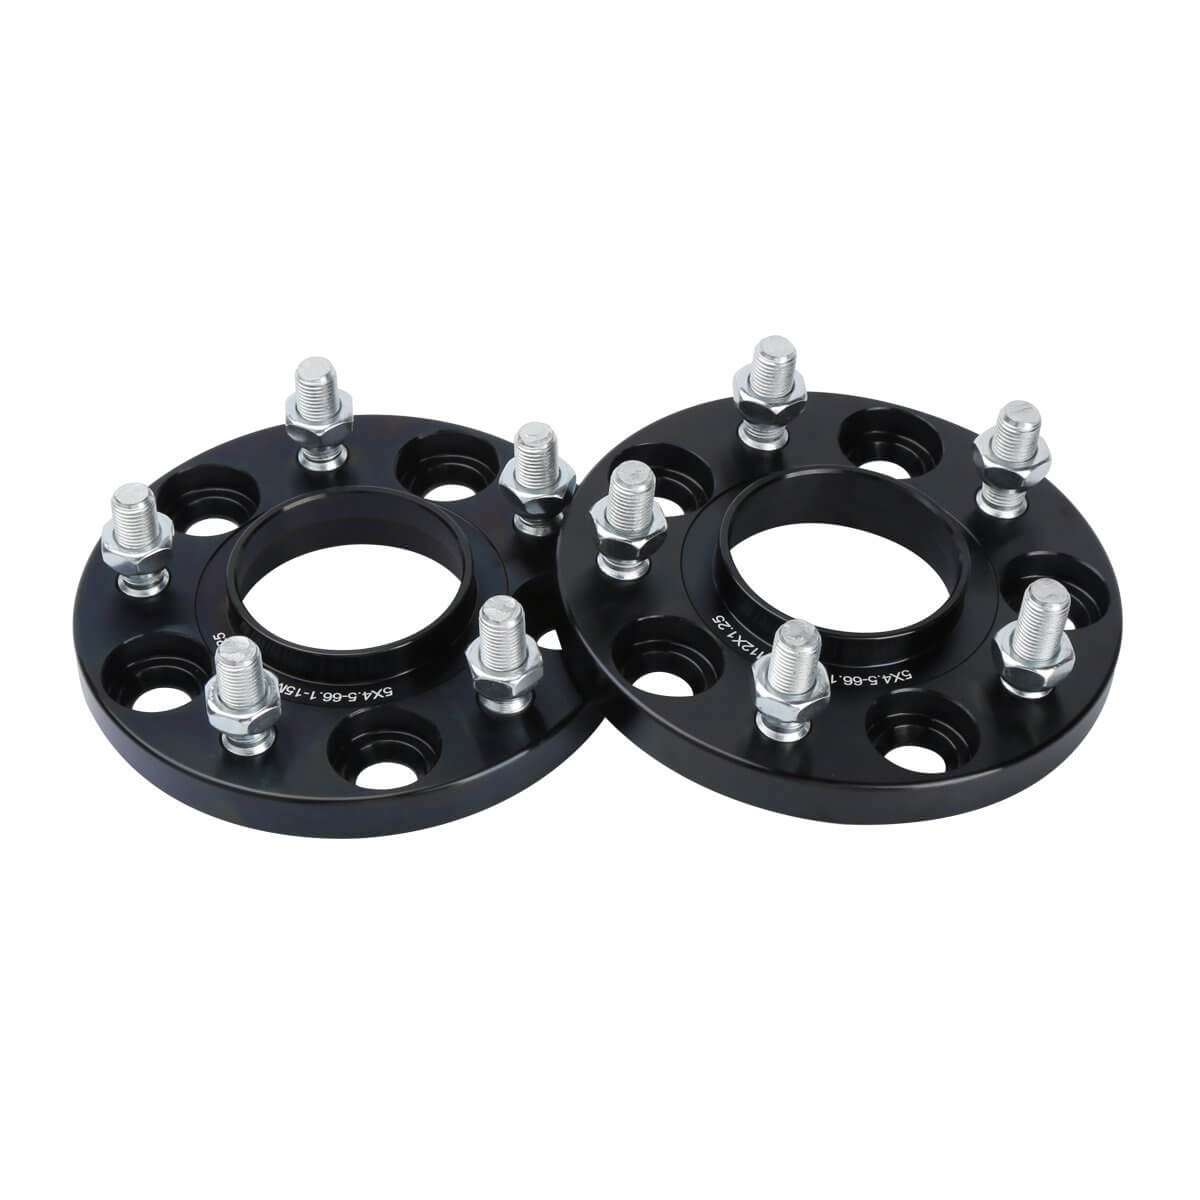 5x4.5 Hubcentric Wheel Spacers For Infiniti G35/G37 15mm xccscss.